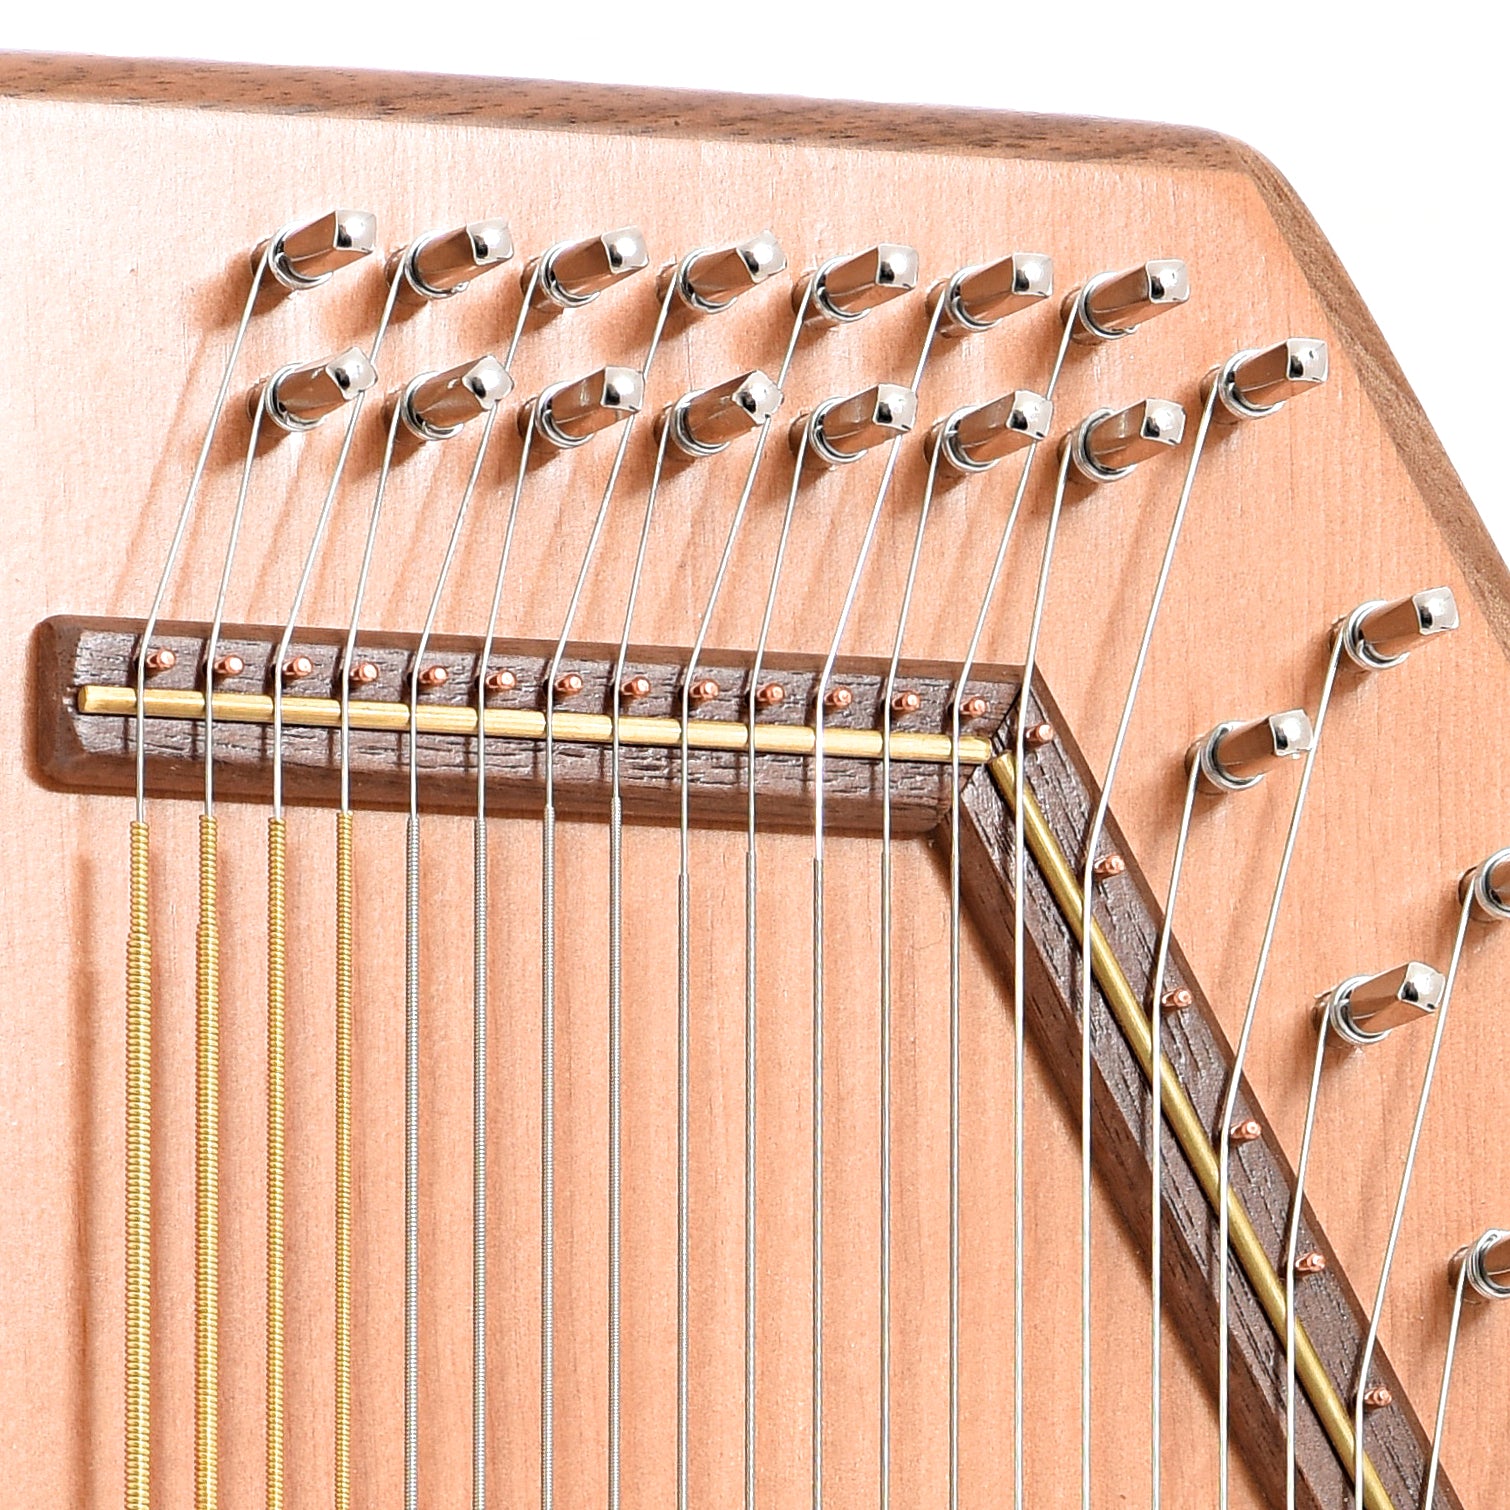 Tuning pegs of D'Aigle TLC Traditional Luthier's Classic 21-Bar Autoharp & Gigbag